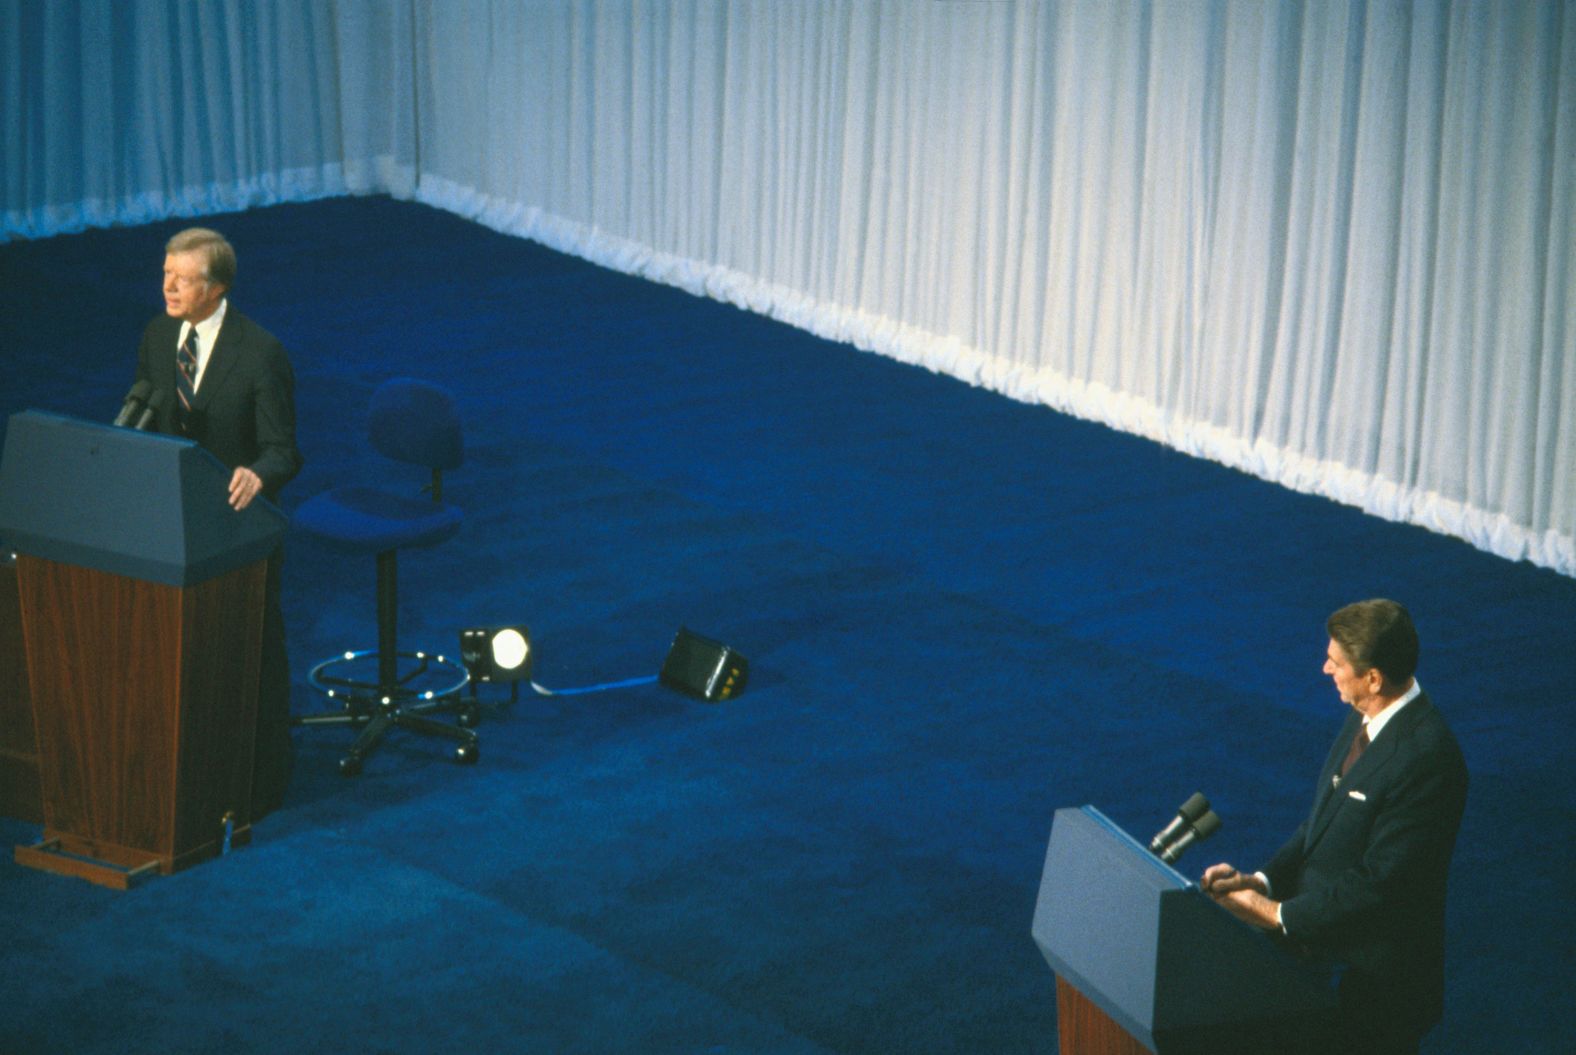 Carter, left, and Reagan stand at their lecterns during their debate in Cleveland in 1980. It was this debate where <a href="index.php?page=&url=https%3A%2F%2Fwww.cnn.com%2FALLPOLITICS%2F1996%2Fdebates%2Fhistory%2F1980%2Findex.shtml">Reagan famously asked Americans</a>: "Are you better off than you were four years ago?"